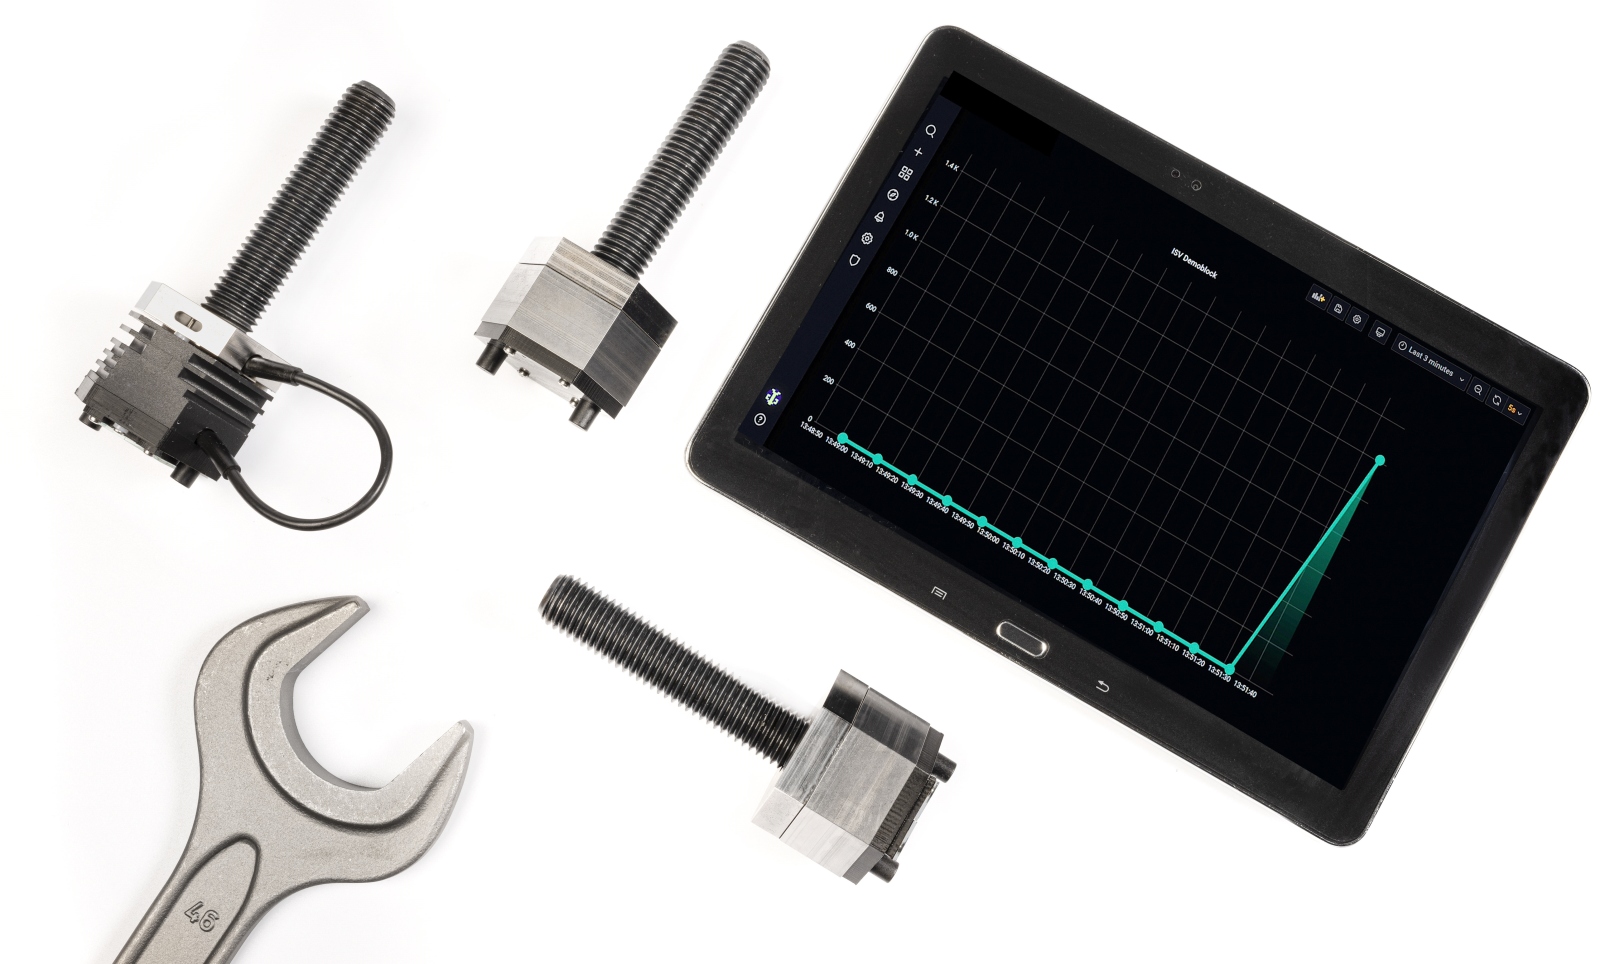 The Smart Screw Connection is designed as a flexible, retrofittable system for DIN screws of various sizes. The display shows the status of the relevant screw in graphical form.